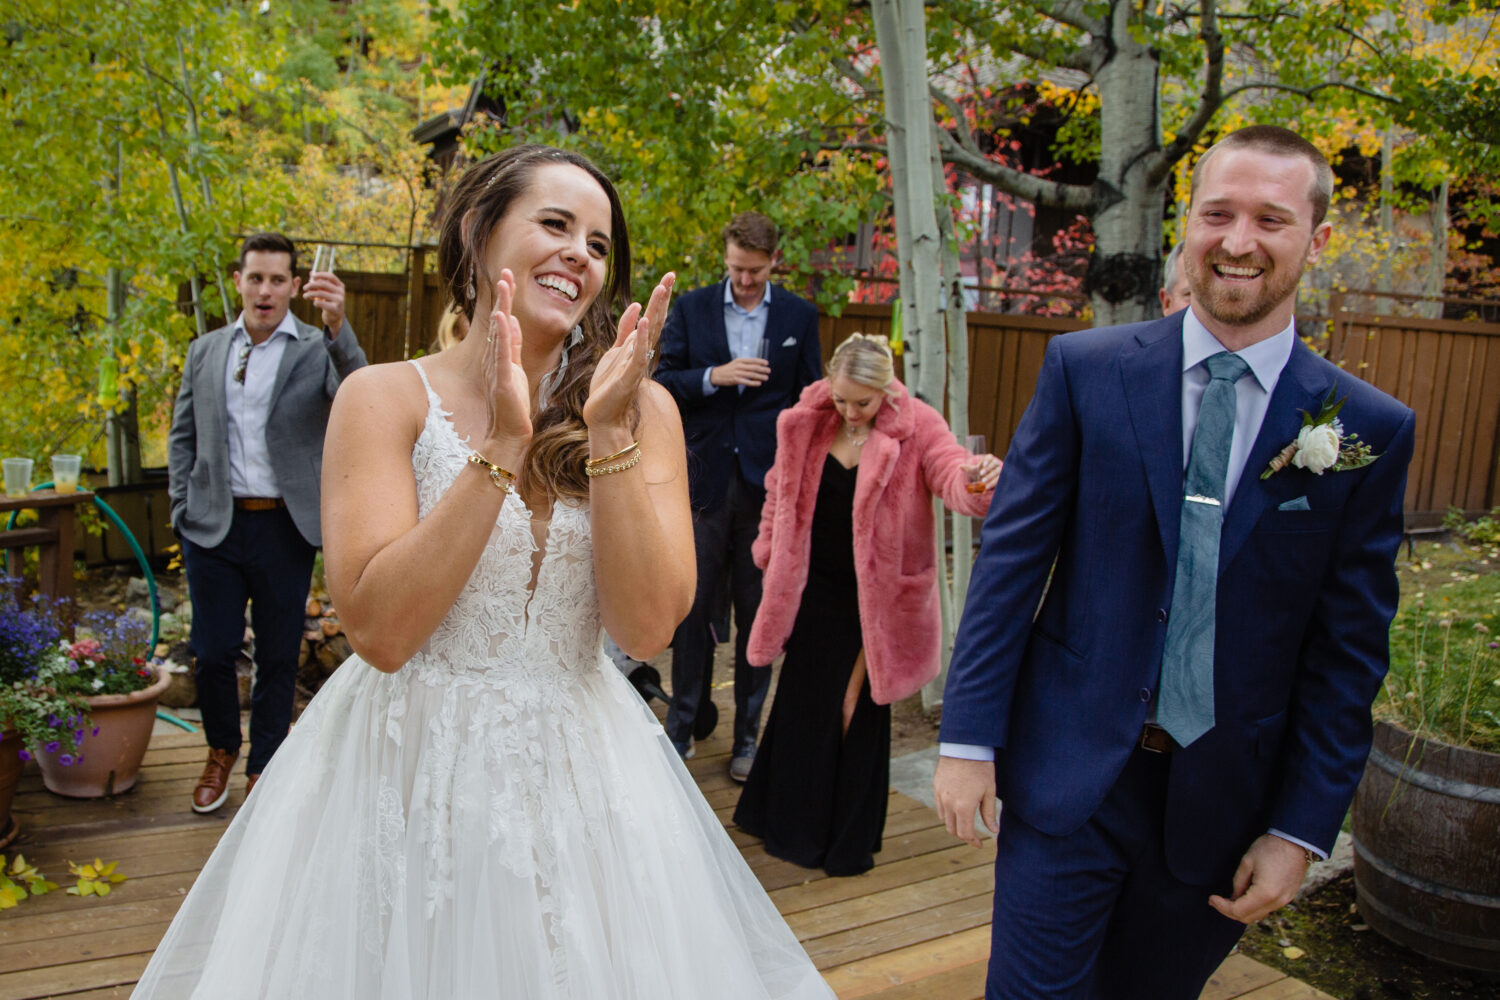 Happy newlyweds celebrate at their outdoor fall wedding with yellow leaves in the background.